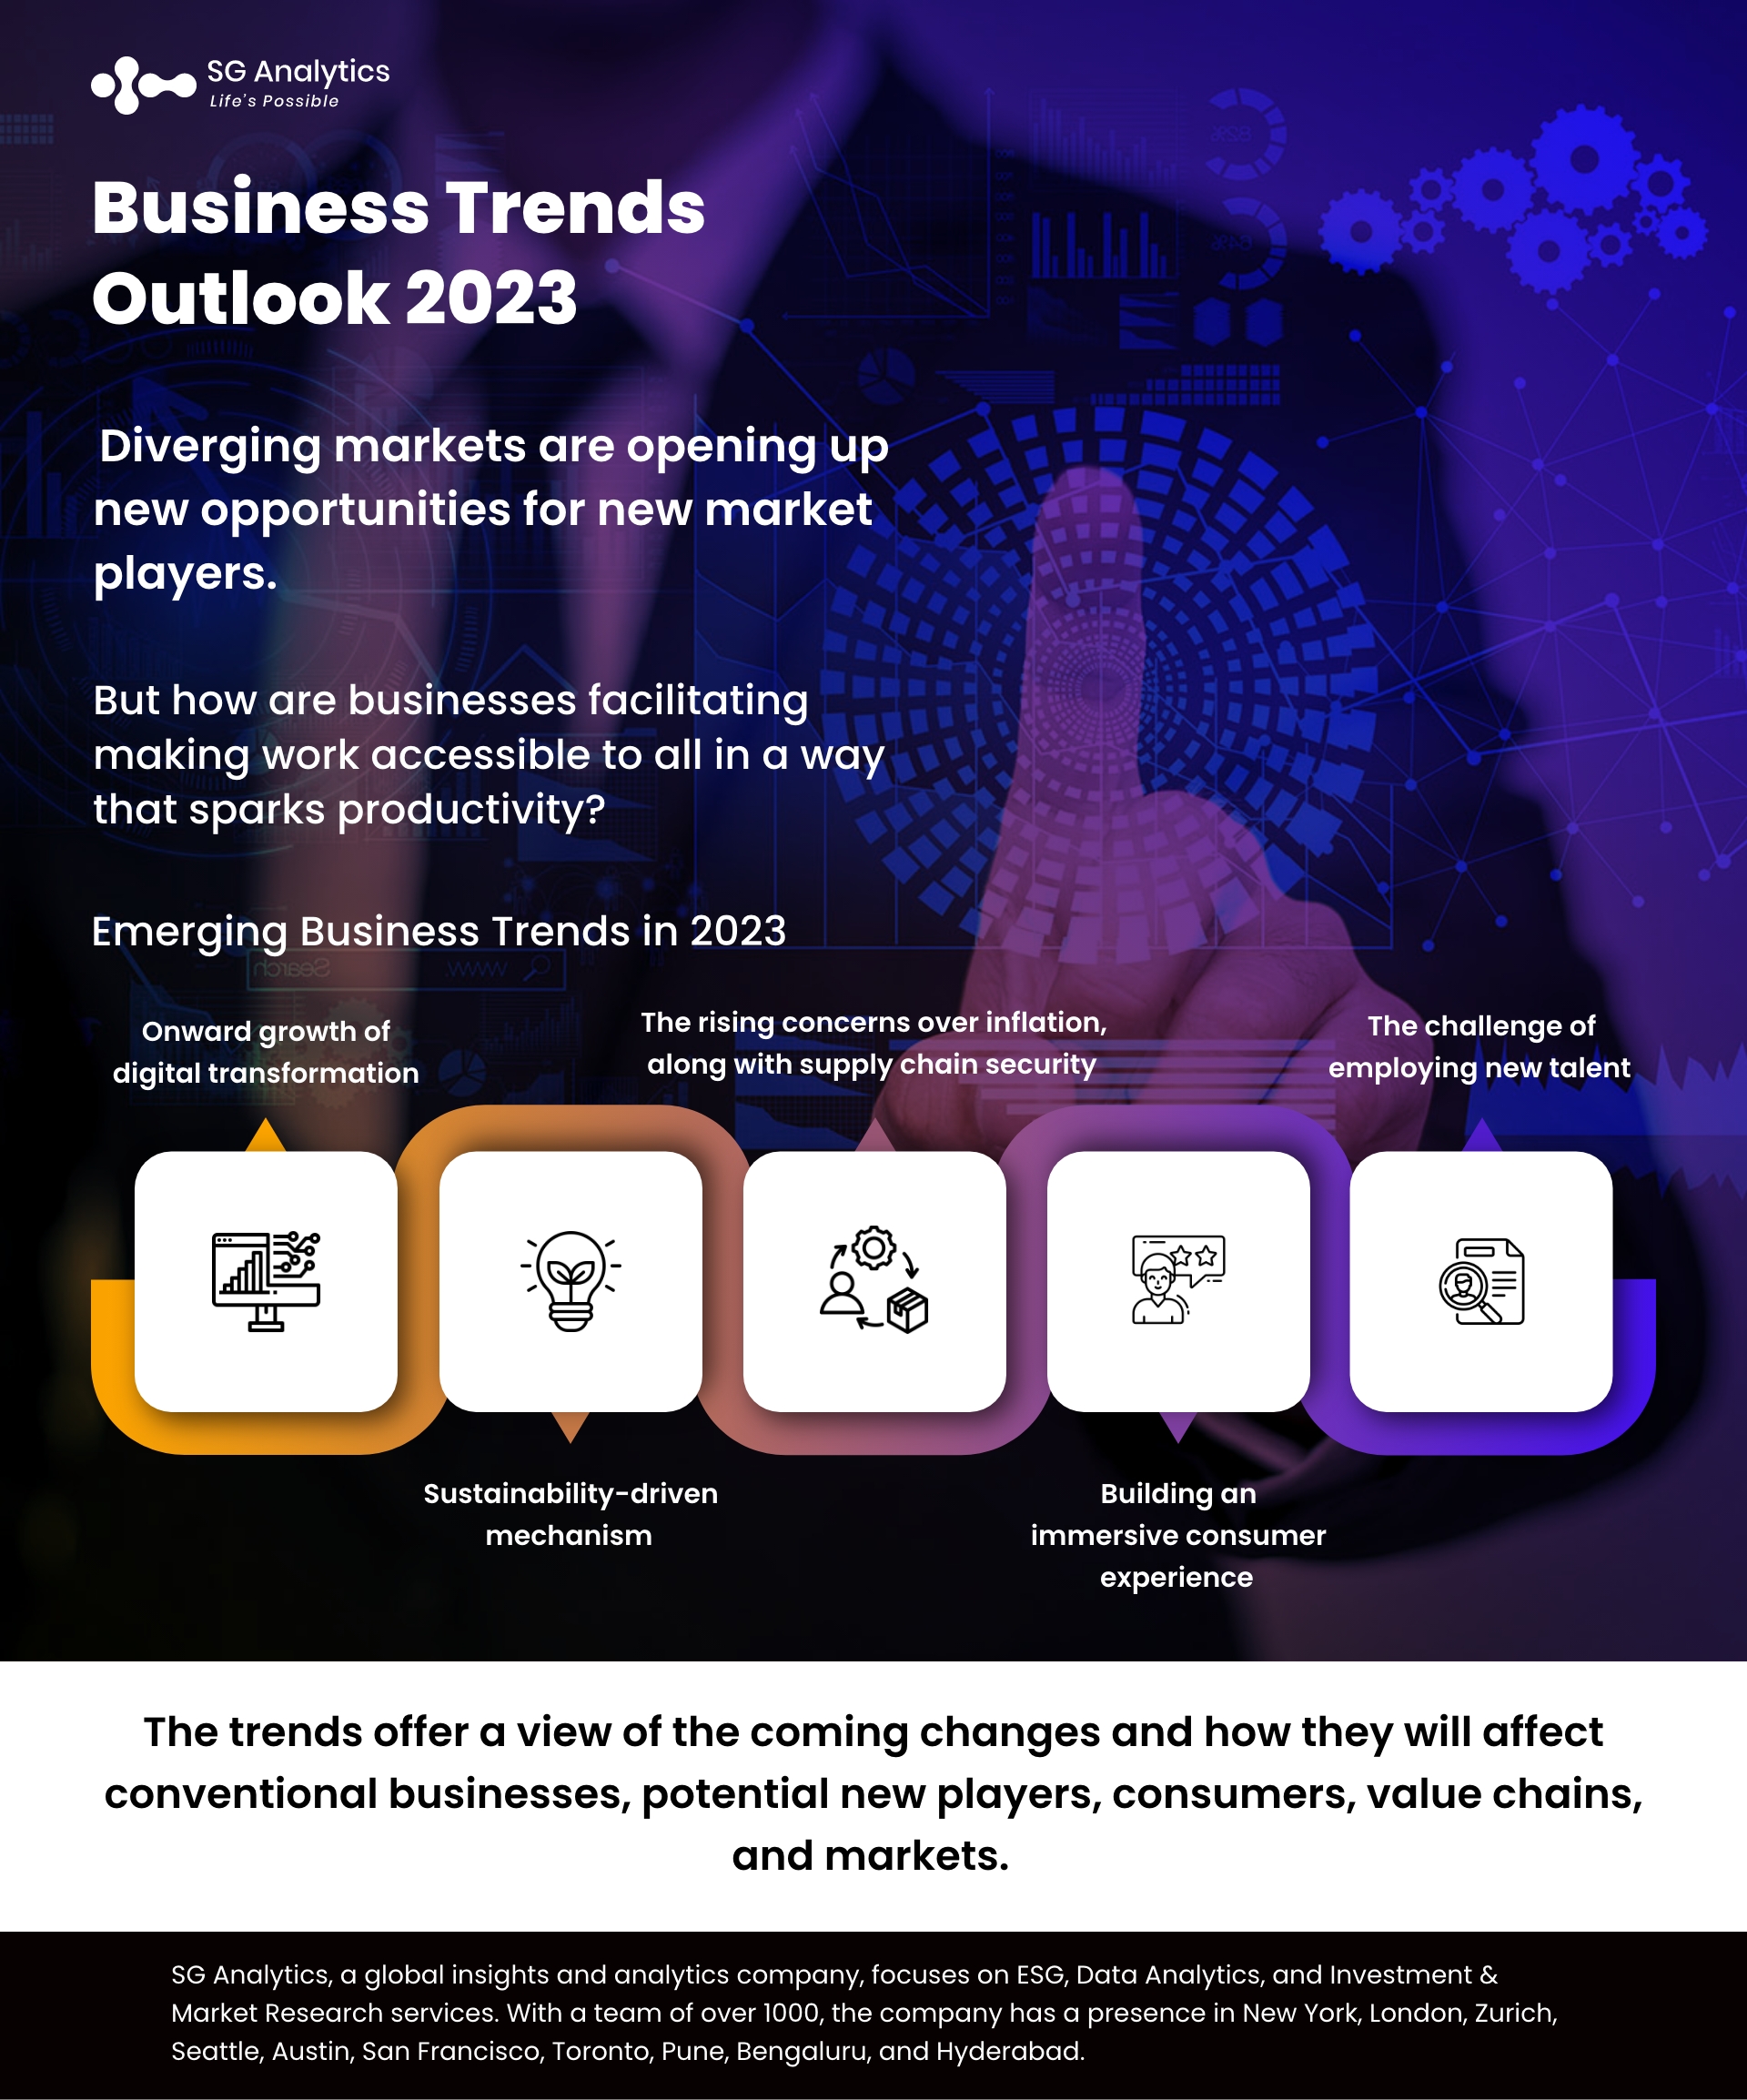 Global Business Trends Outlook 2023